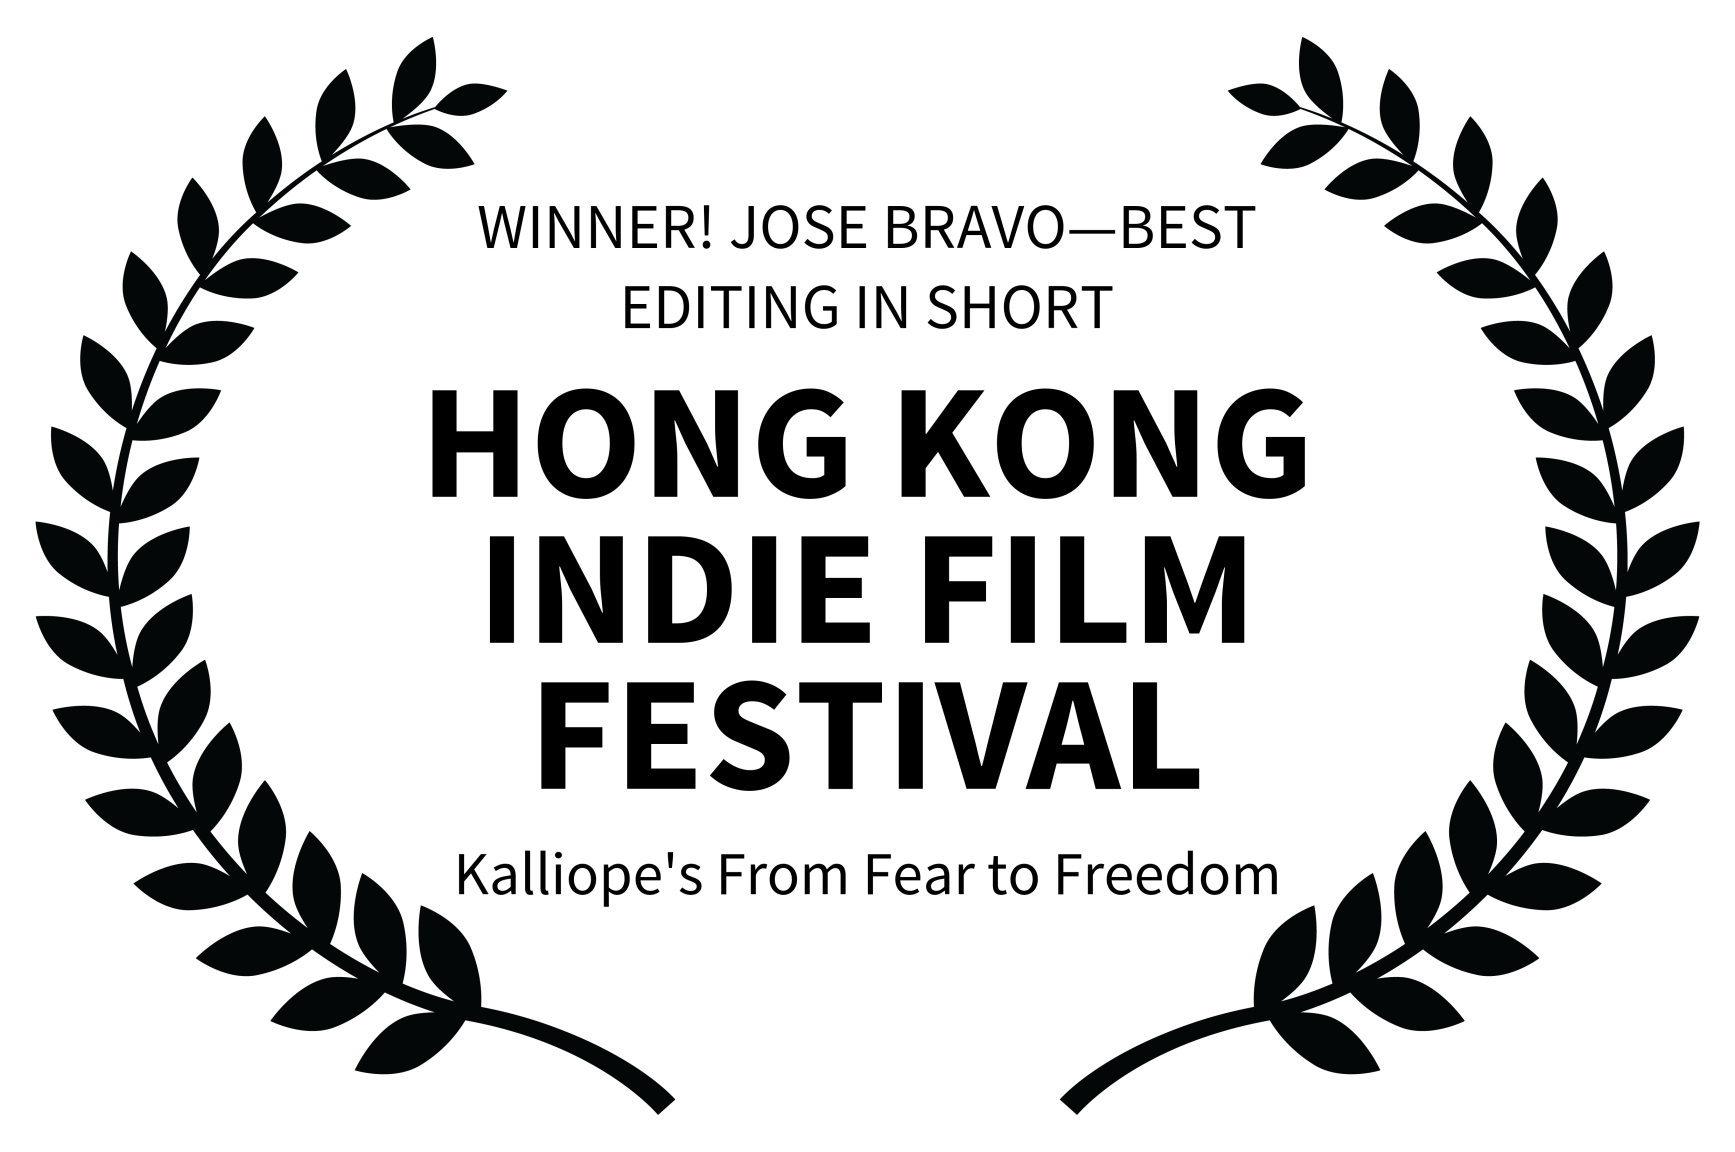 WINNER JOSE BRAVOBEST EDITING IN SHORT - HONG KONG INDIE FILM FESTIVAL - Kalliopes From Fear to Freedom (1).png